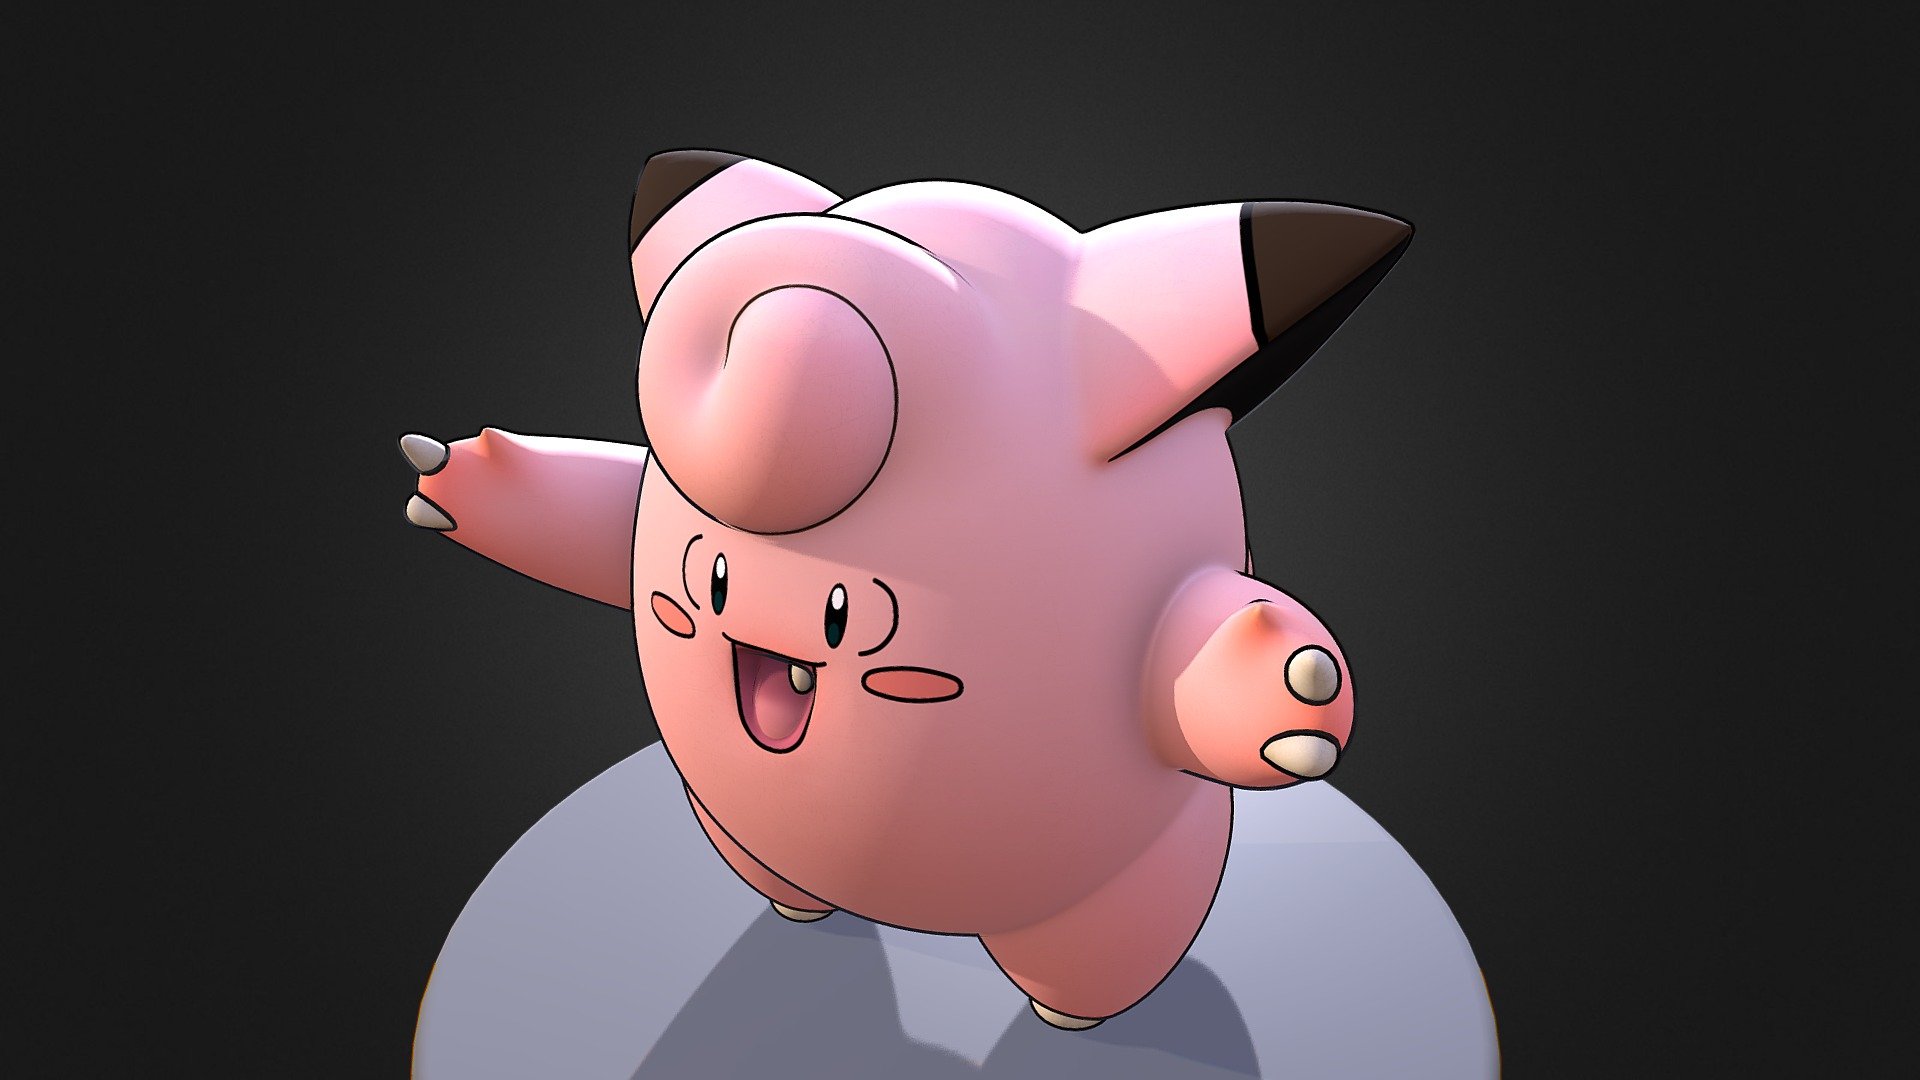 The pink one - Clefairy Pokemon - 3D model by 3dlogicus 3d model